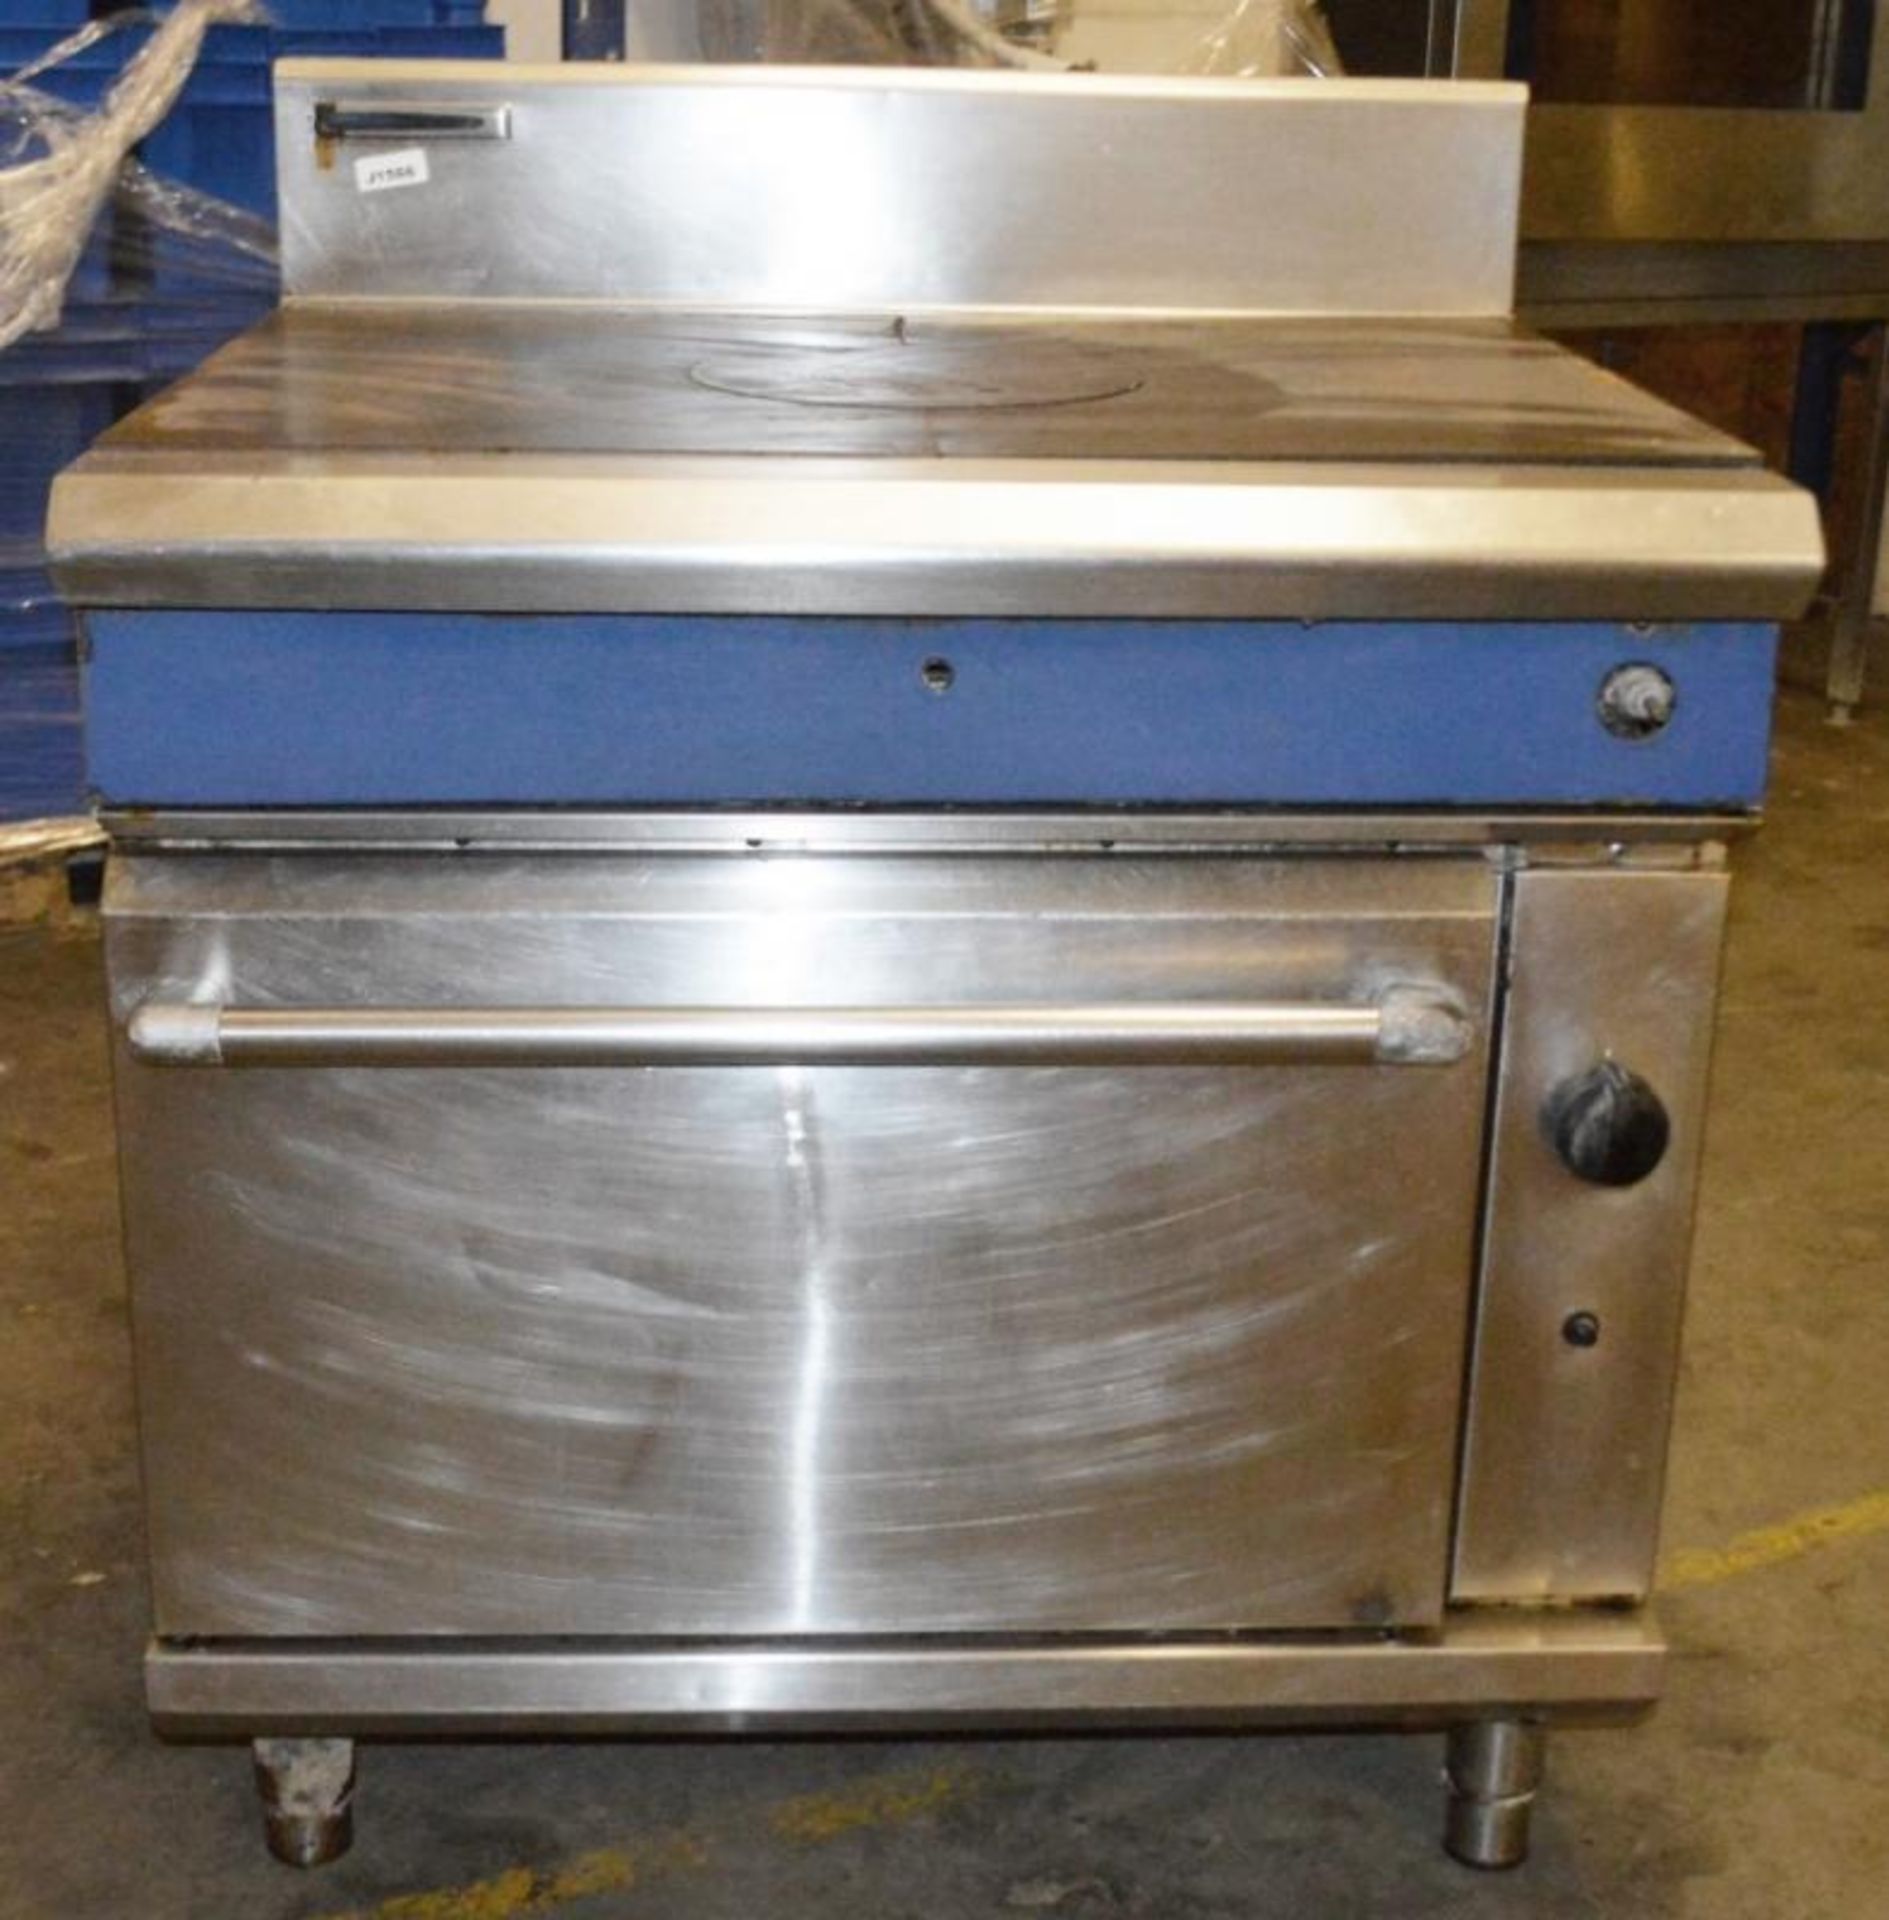 1 x Commercial Natural Gas Solid Top Range In Stainless Steel - Ref: J1566 - Low Start, No Reserve